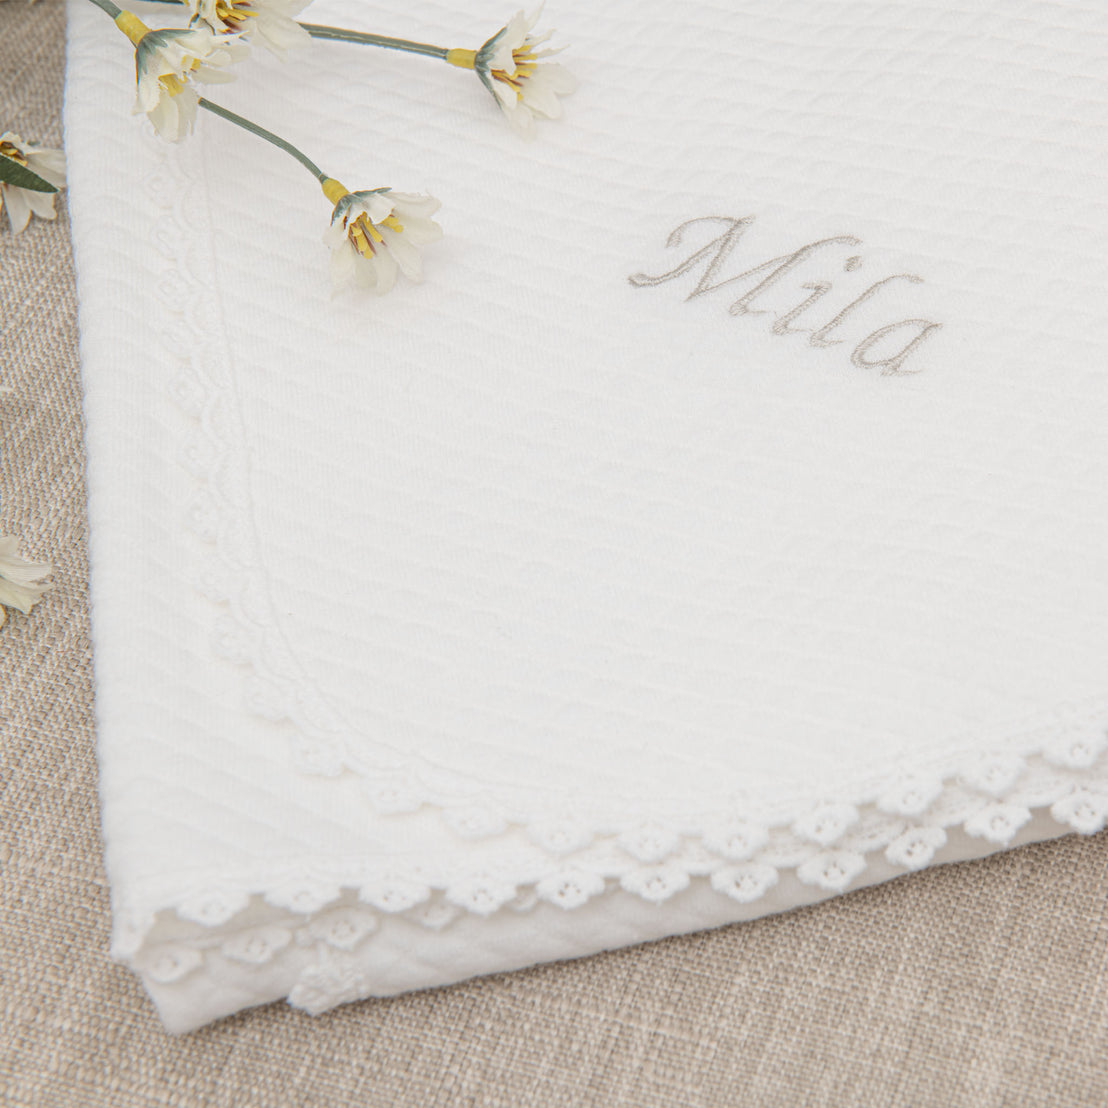 Closeup of a folded Mila Personalized Blanket with the name "Mila" embroidered in silver thread and finished with a floral edge lace on the sides. delicate floral accents, detailed lace trim. Small white flowers lie on the surface of the top left corner.